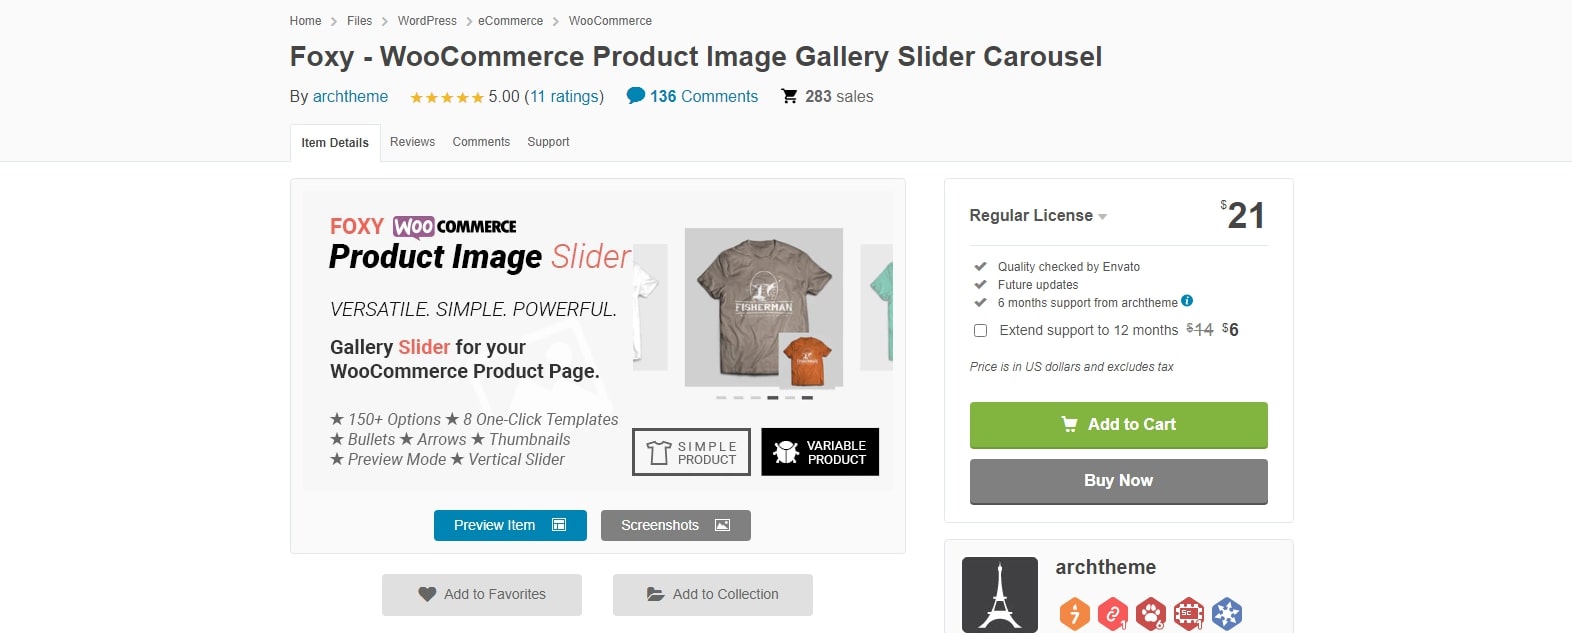 Foxy – WooCommerce Product Image Gallery Slider Carousel